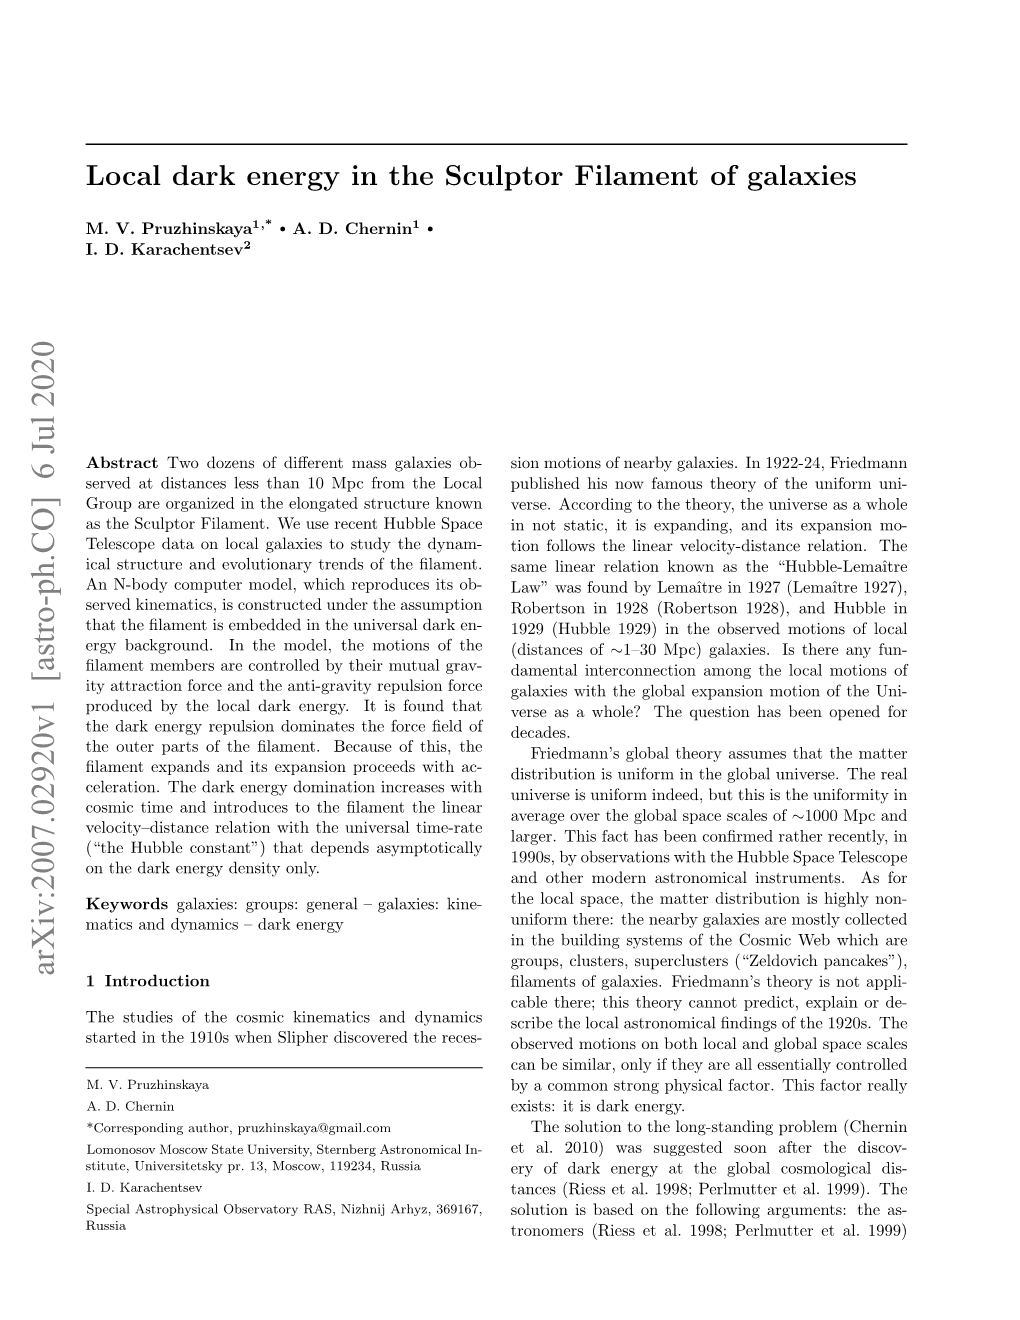 Local Dark Energy in the Sculptor Filament of Galaxies